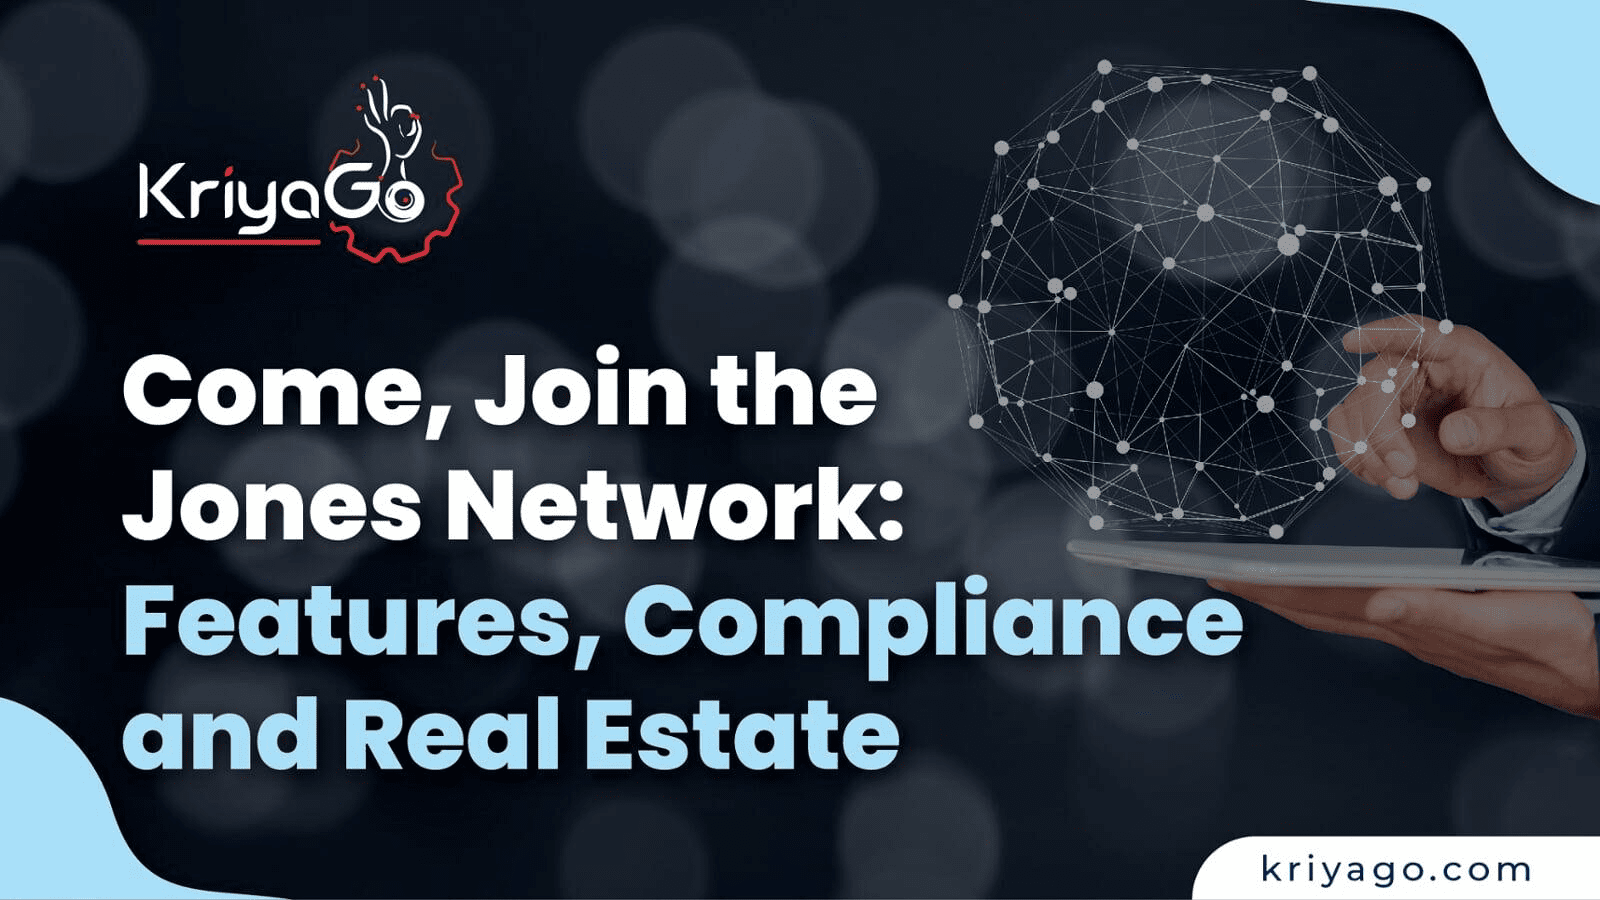 Come, Join the Jones Network: Features, Compliance and Real Estate